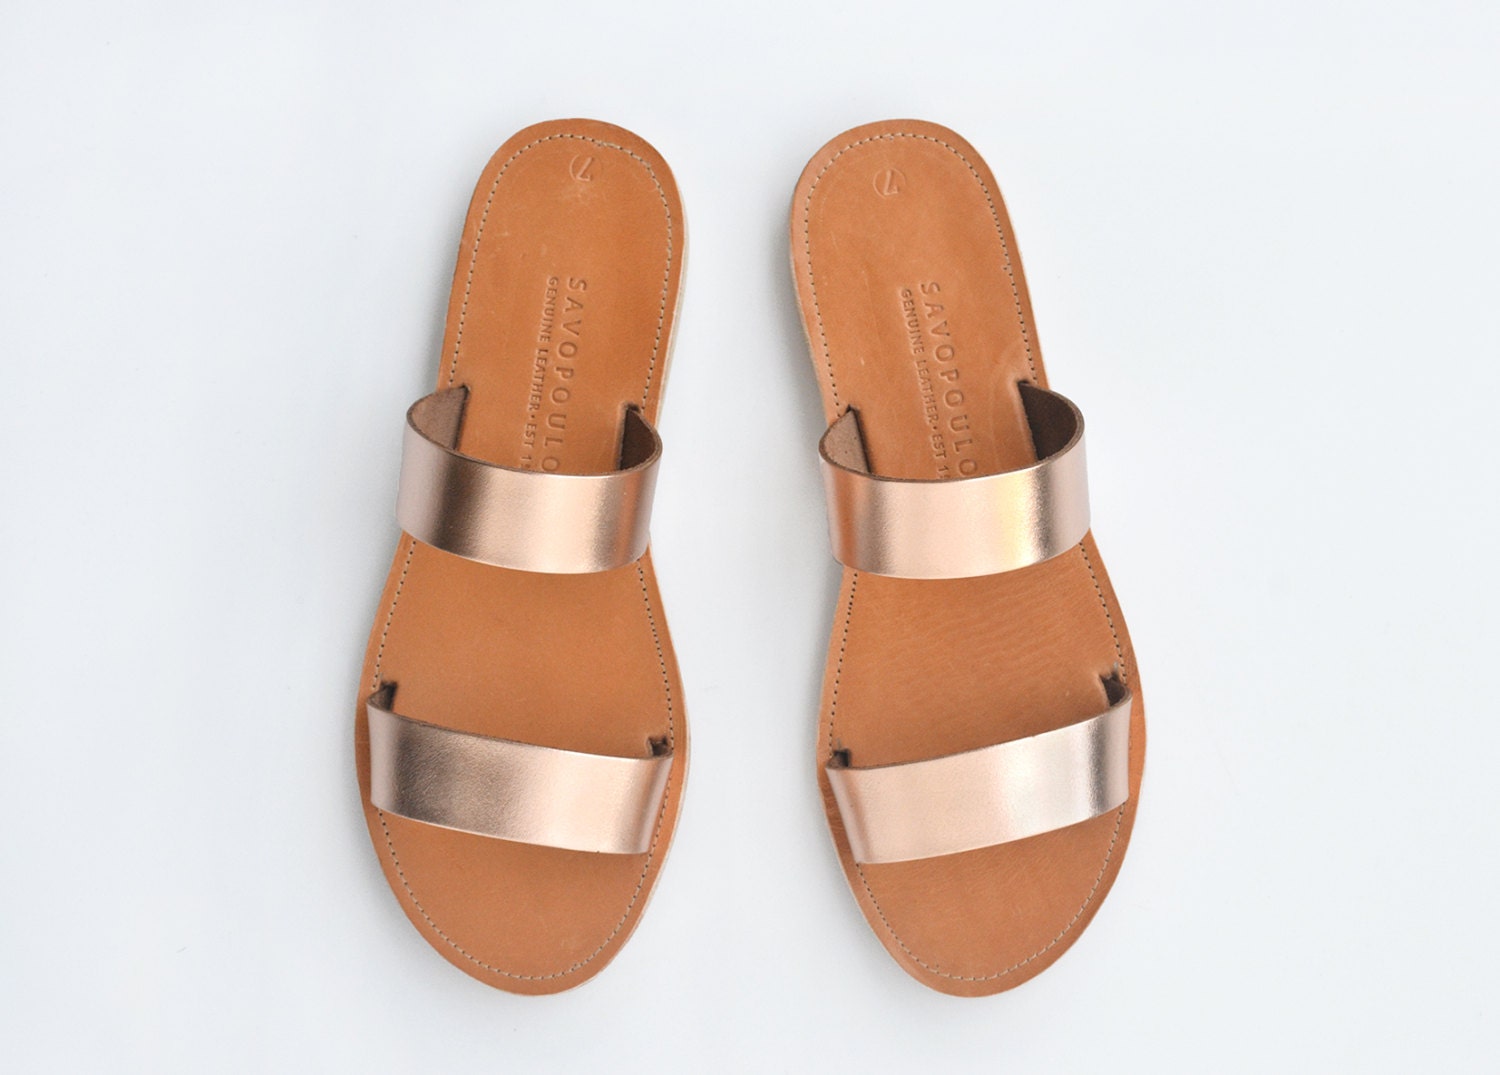 Leather Sandals Two Strap Greek Sandals in Rose Gold Leather 